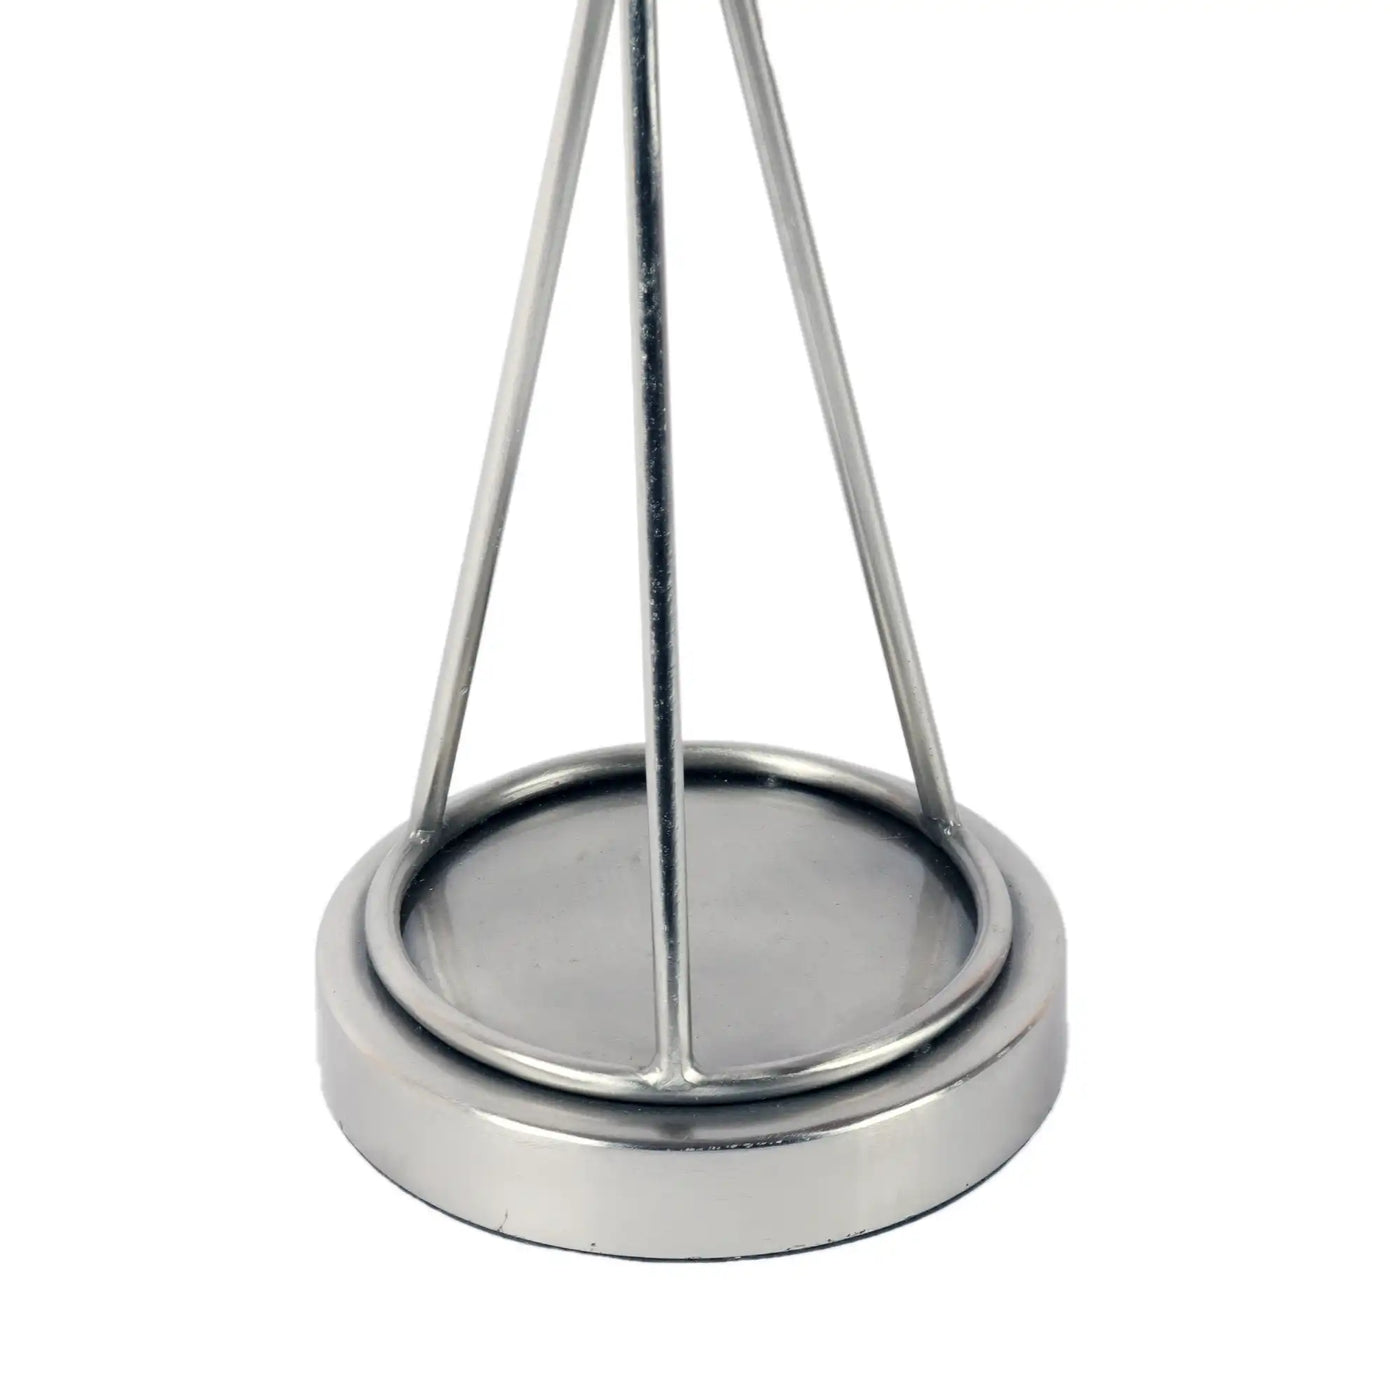 "Sybil's Orb" Silver Table Lamp in Pewter Finish 73-224-51-1